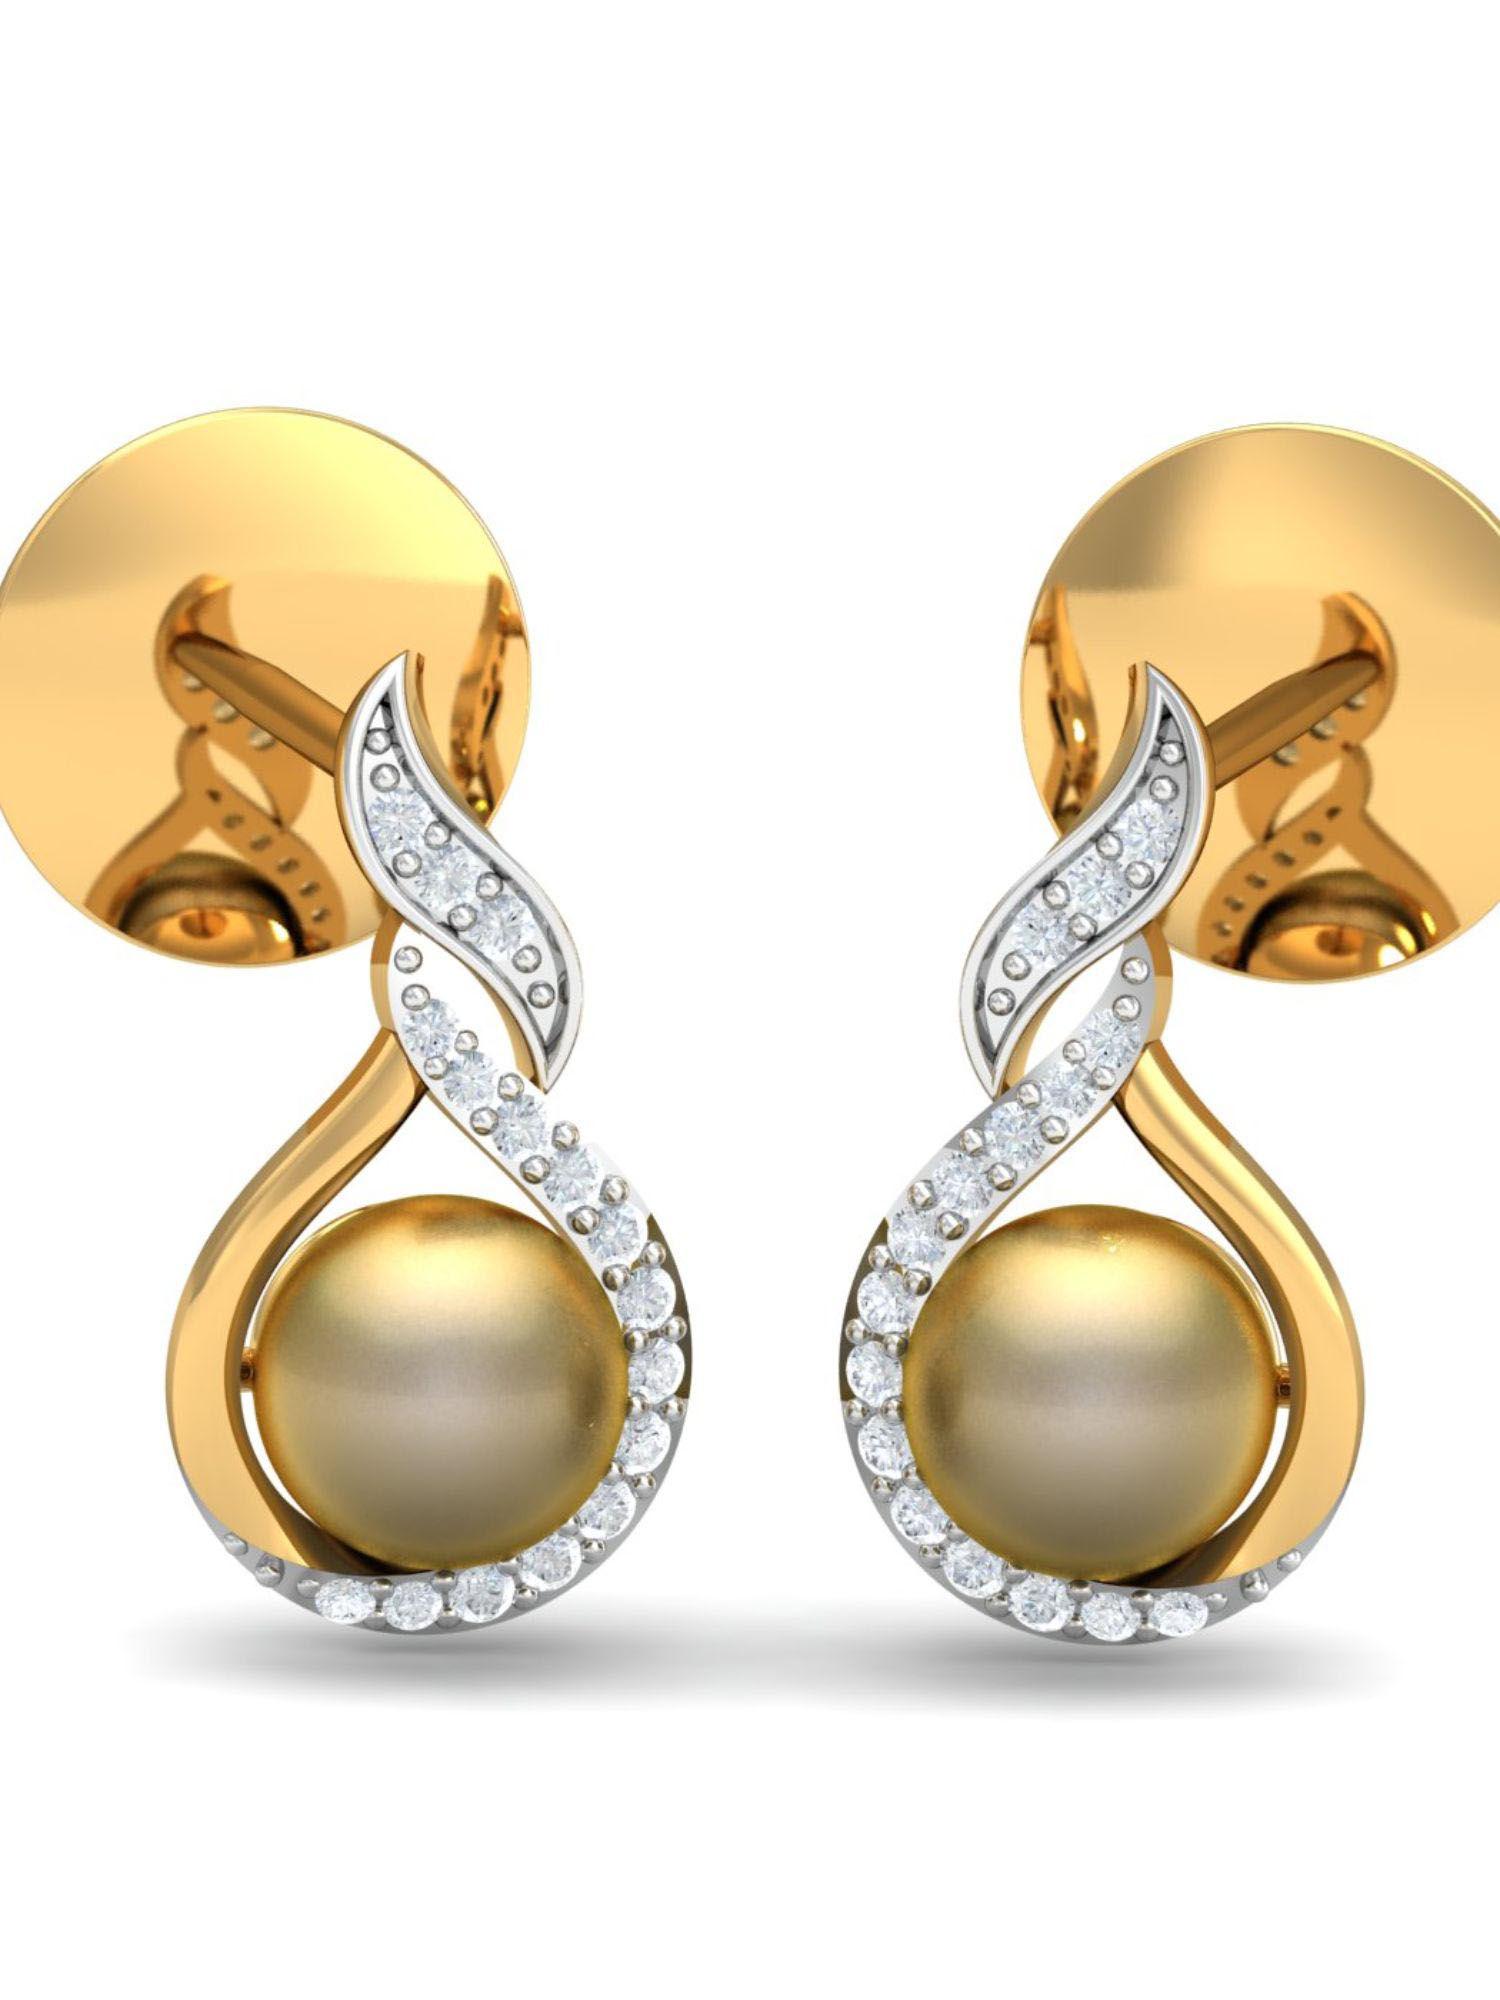 14k flaming pearl earrings for women and girls